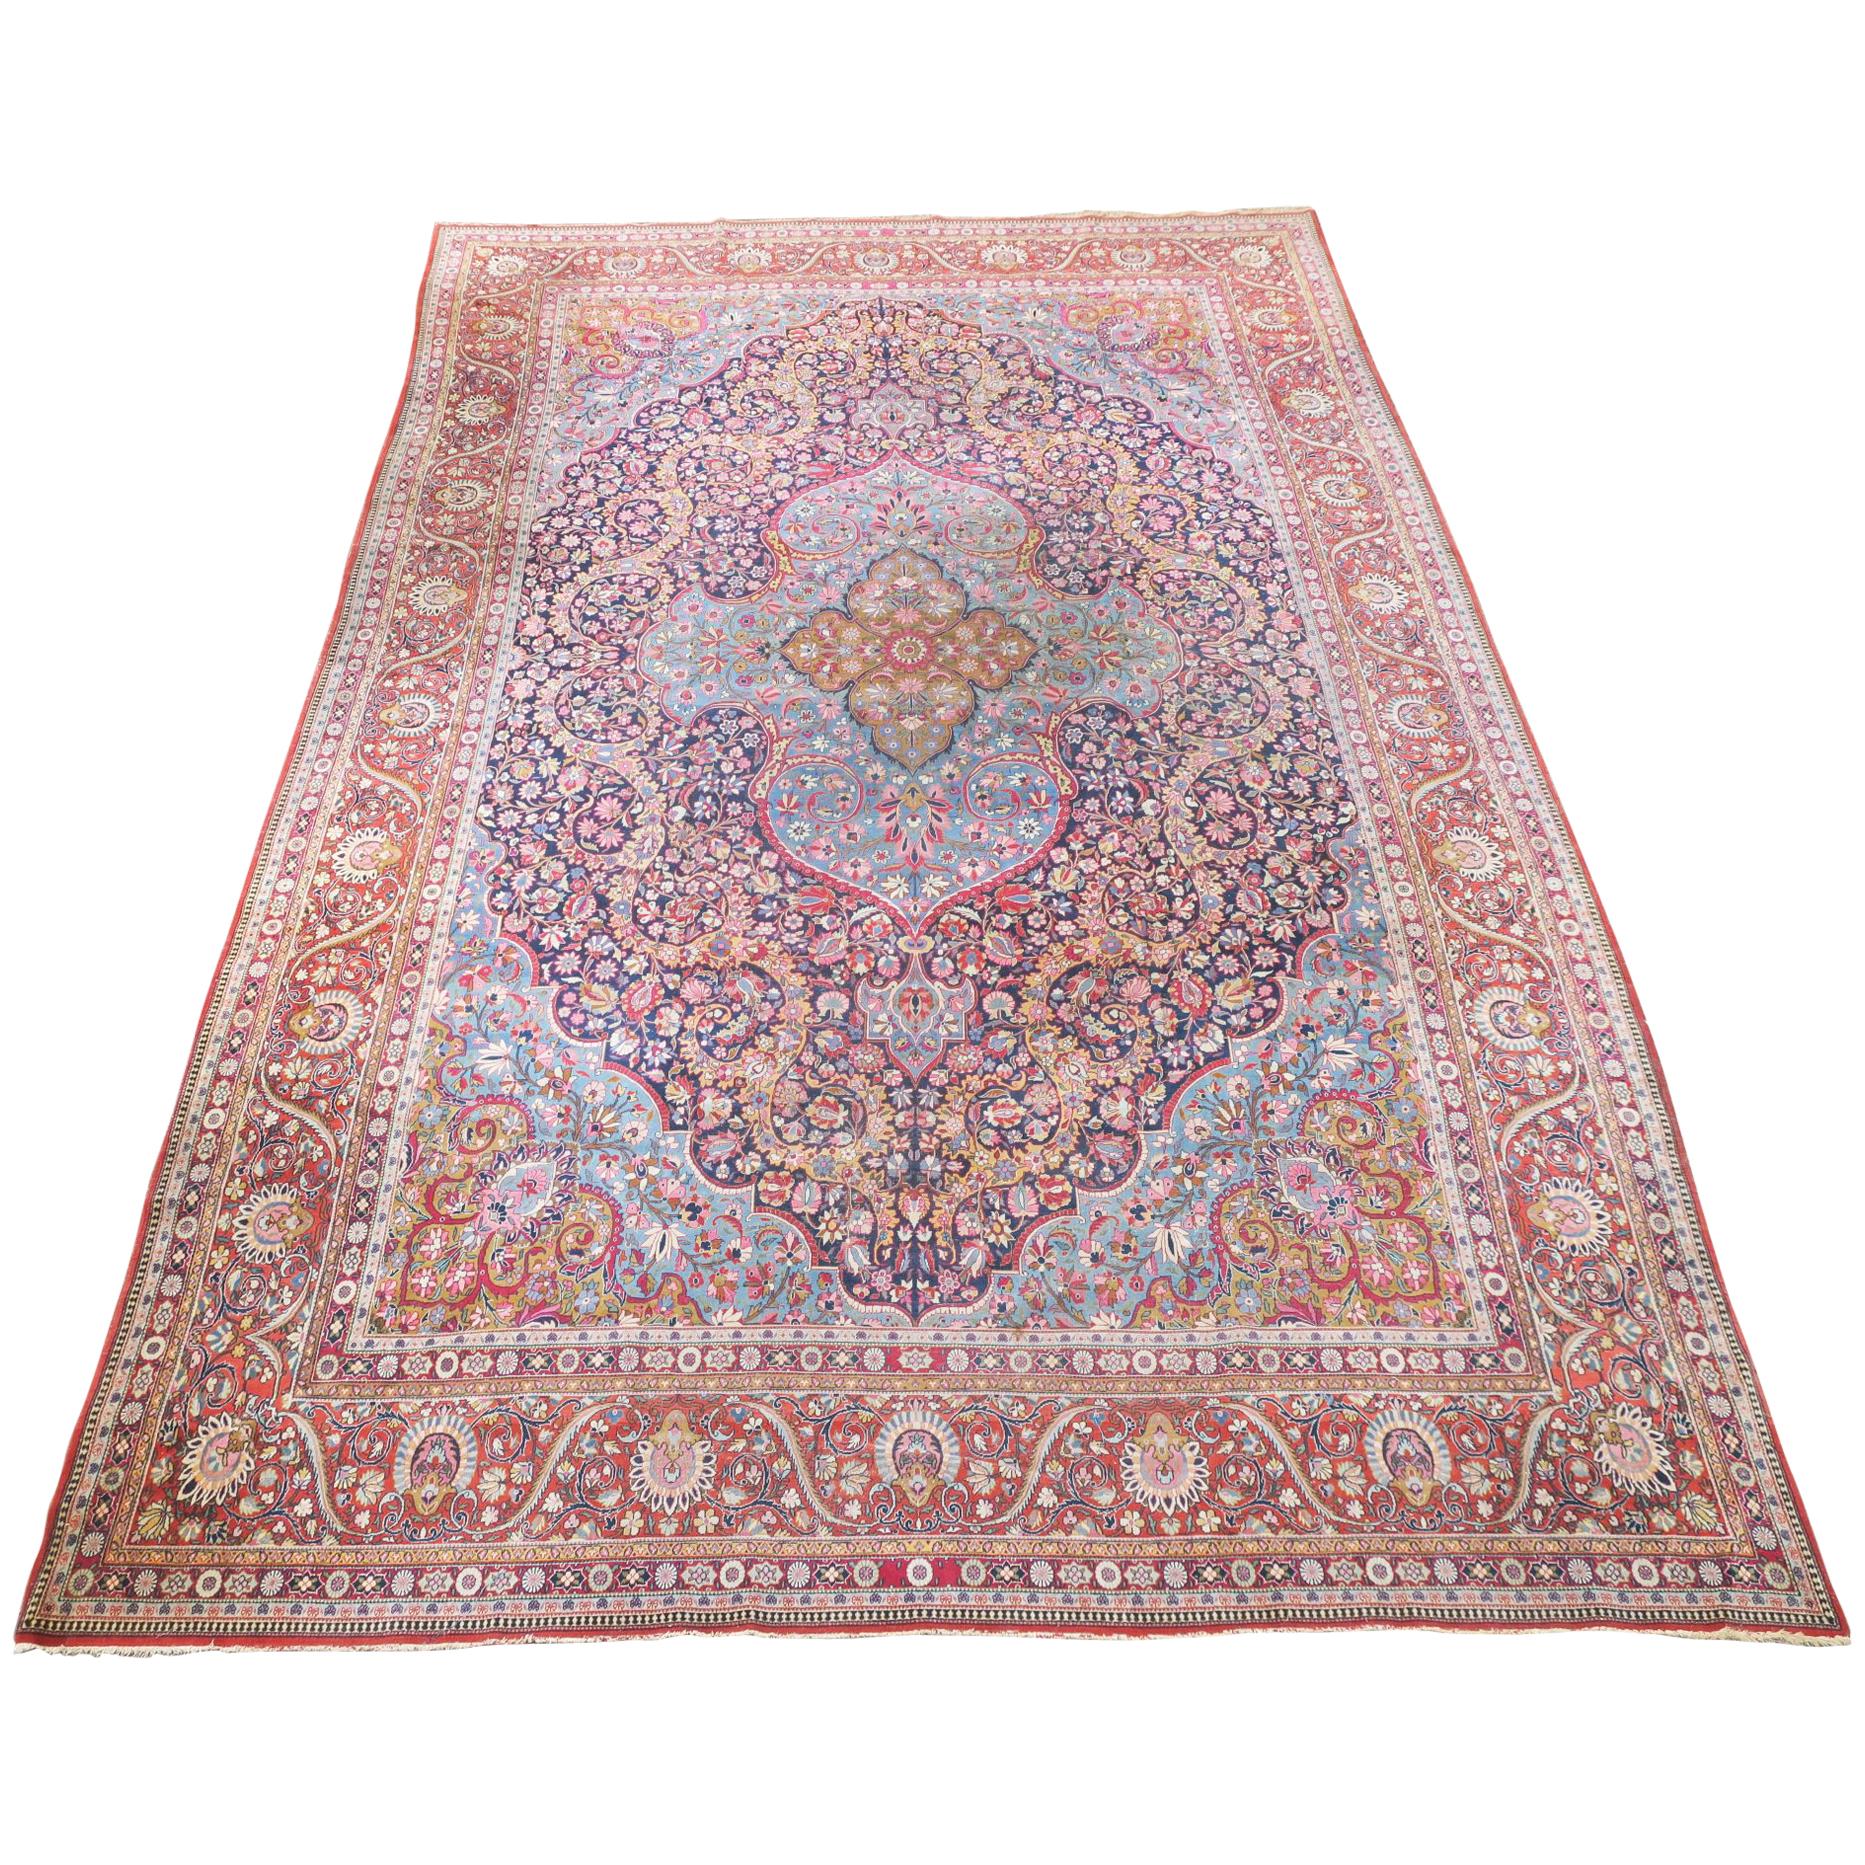 Large Isfahan Carpet, Early 20th Century im Angebot